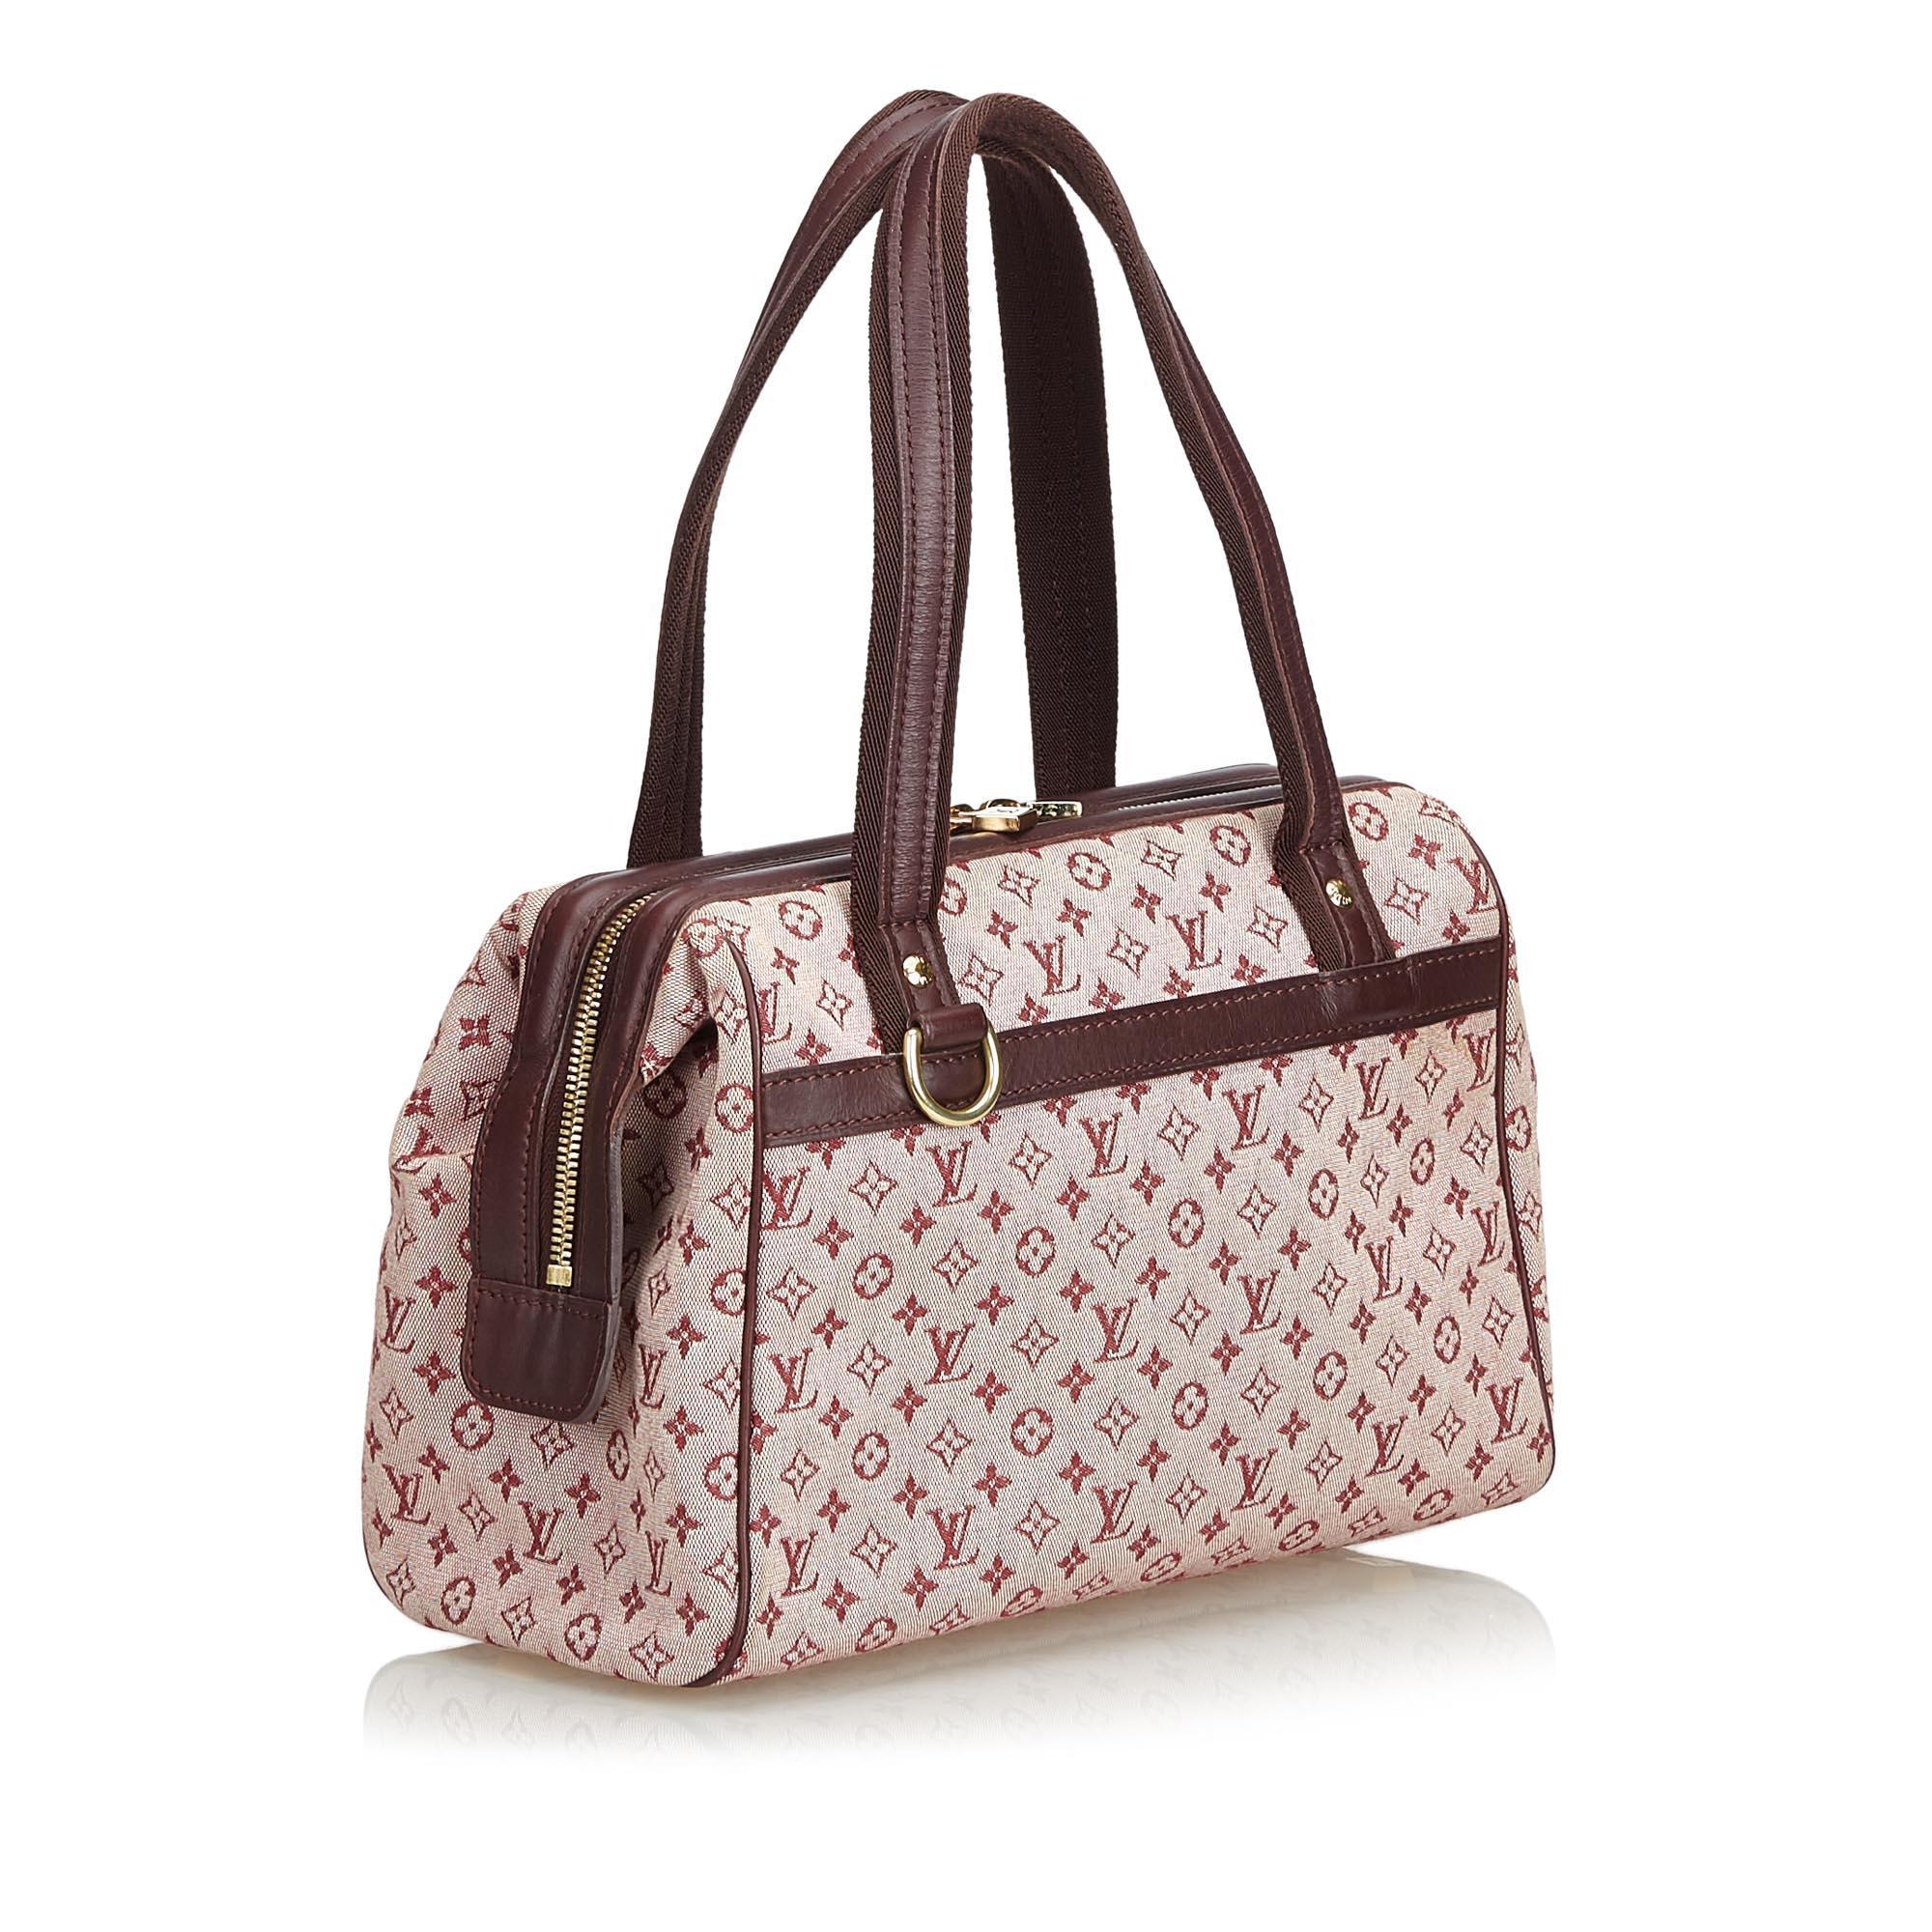 The Josephine PM features the Monogram Mini Lin canvas body with leather trims, flat leather straps and trim, a top zip closure, and interior cell and zip pockets. It carries as B+ condition rating.

Inclusions: 
Dust Bag


Louis Vuitton pieces do